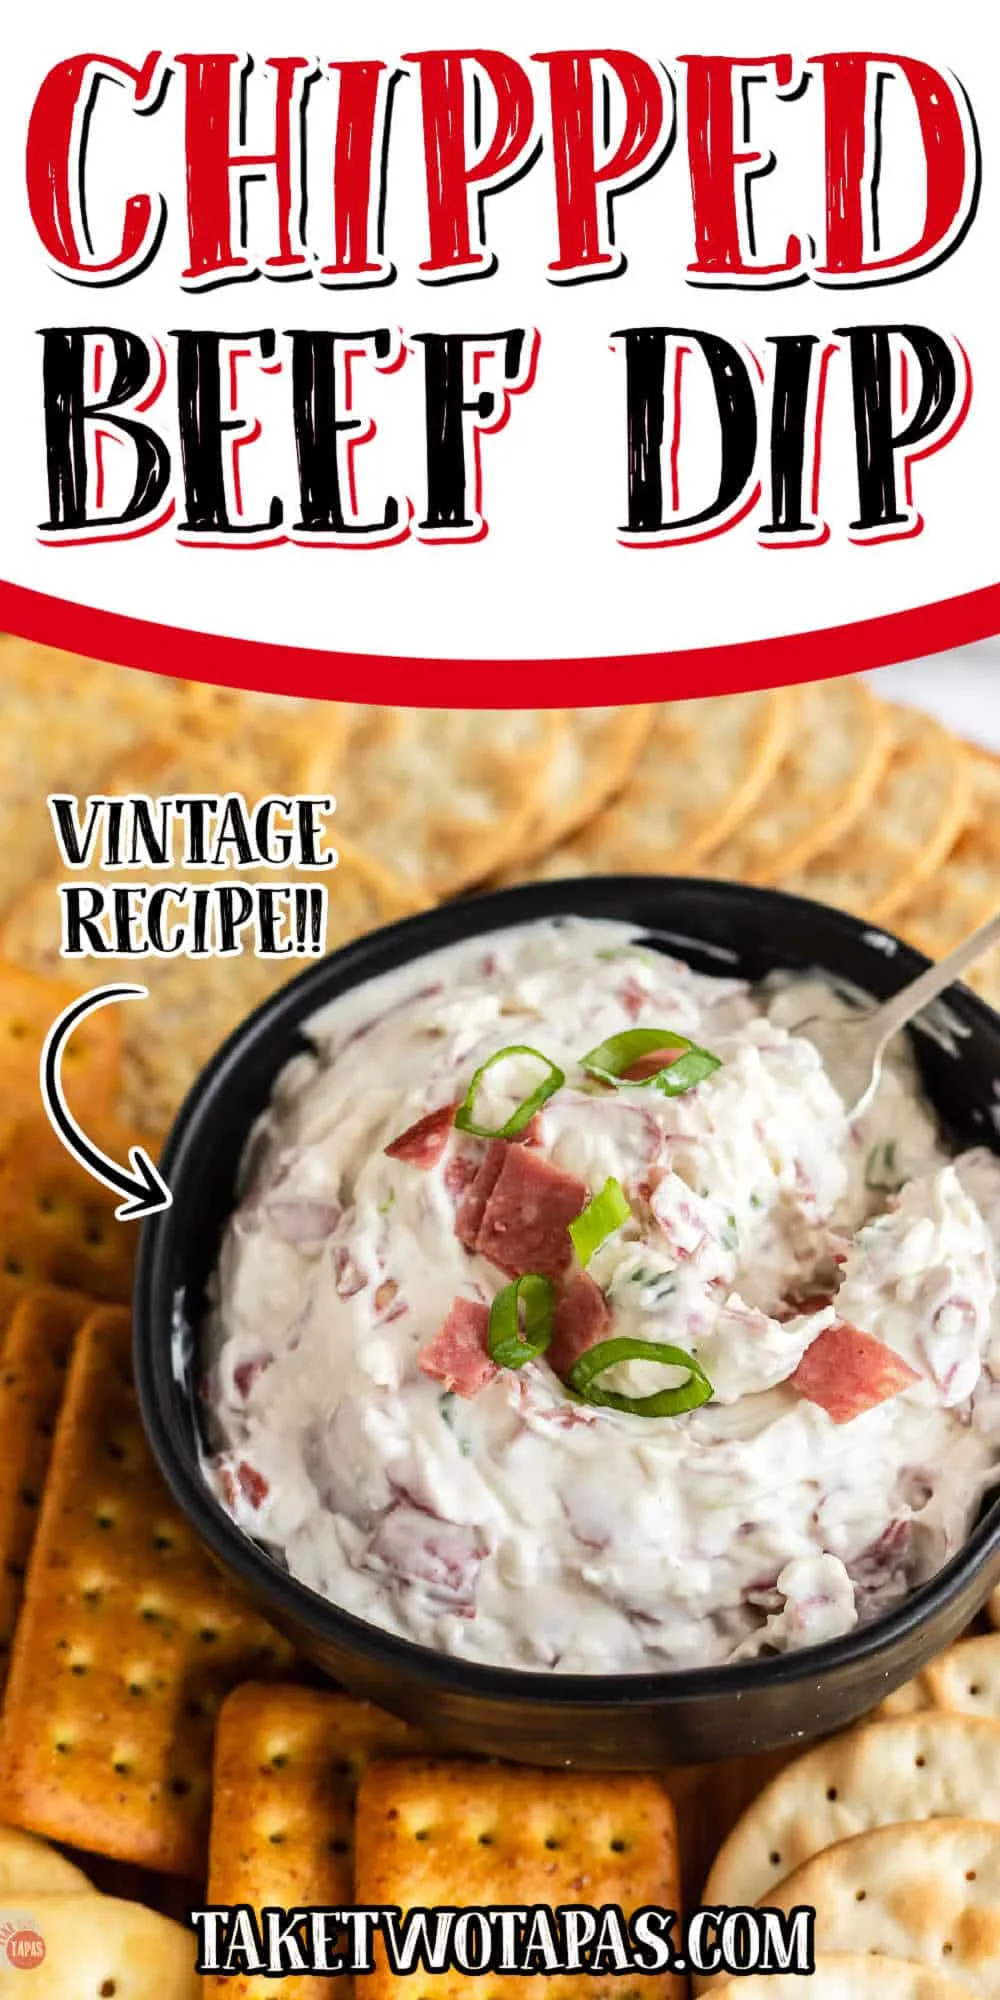 dip and crackers with text "chipped beef dip vintage recipe"